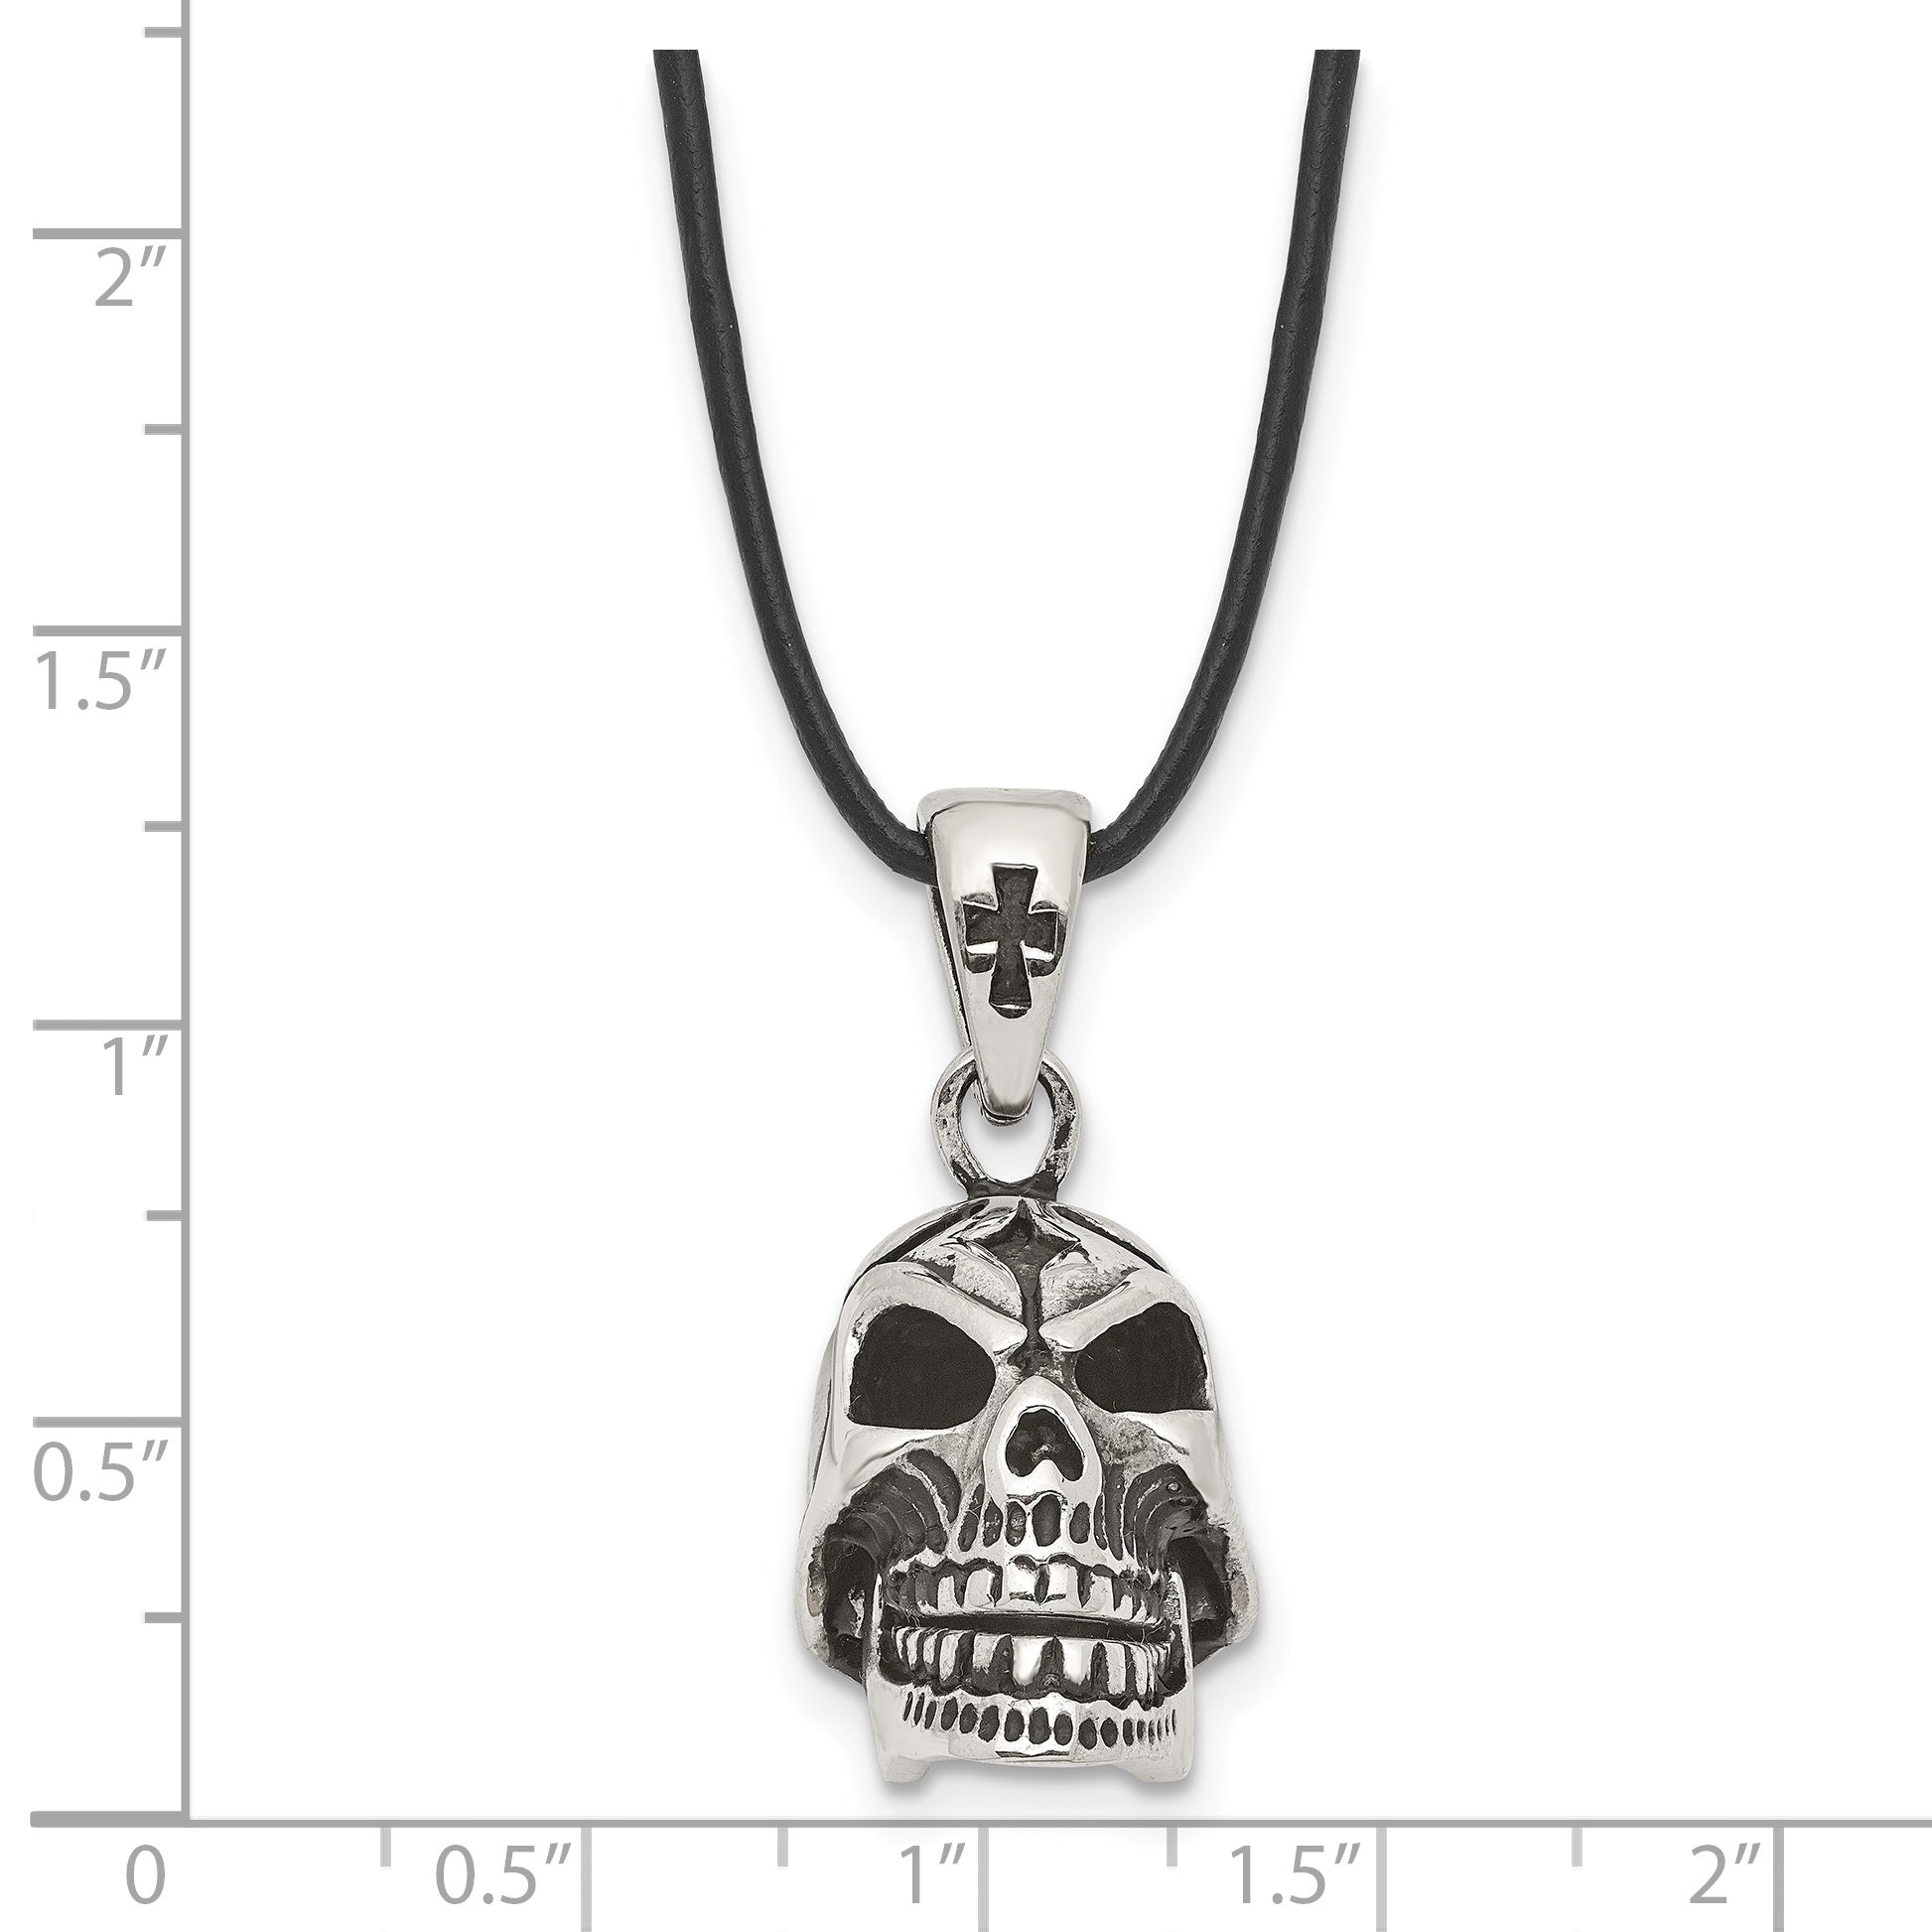 Chisel Stainless Steel Antiqued and Polished Moveable Skull Pendant on a 20 inch Leather Cord Necklace